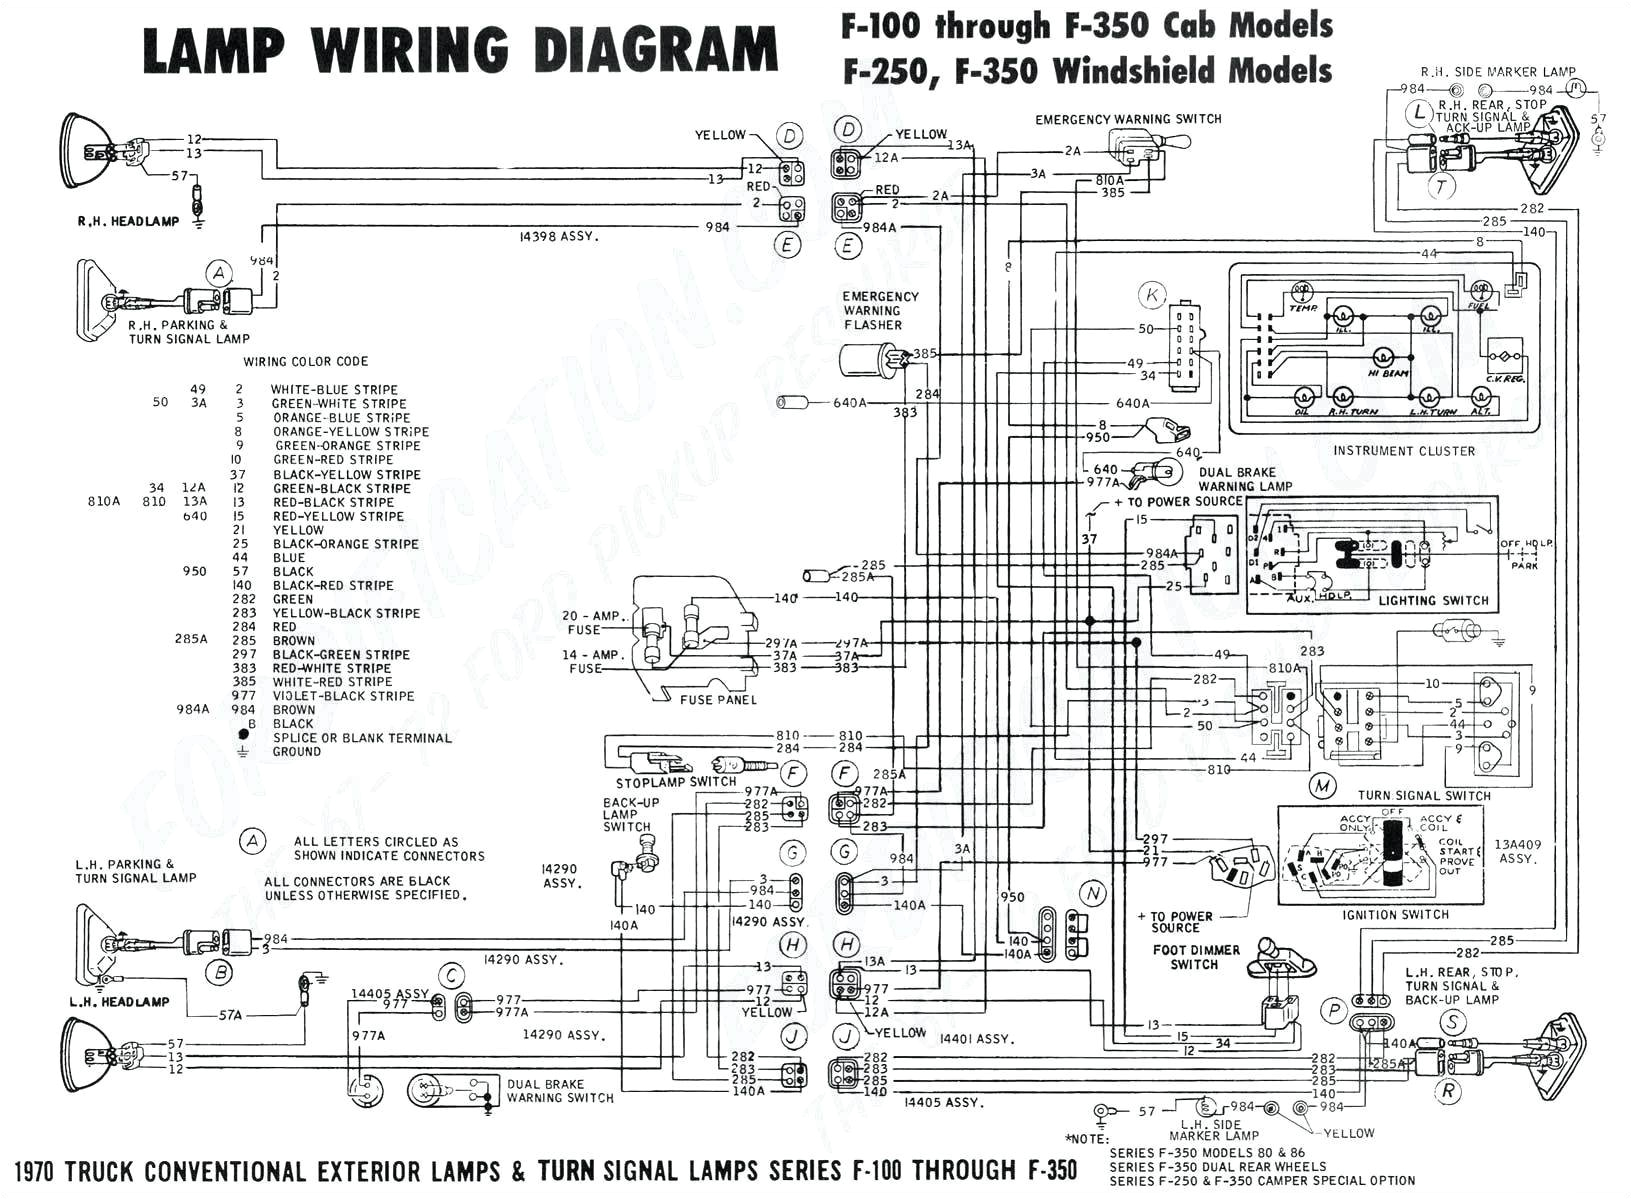 2002 e150 radio wiring diagram wiring diagram databaseford wiring diagrams are grouped together by